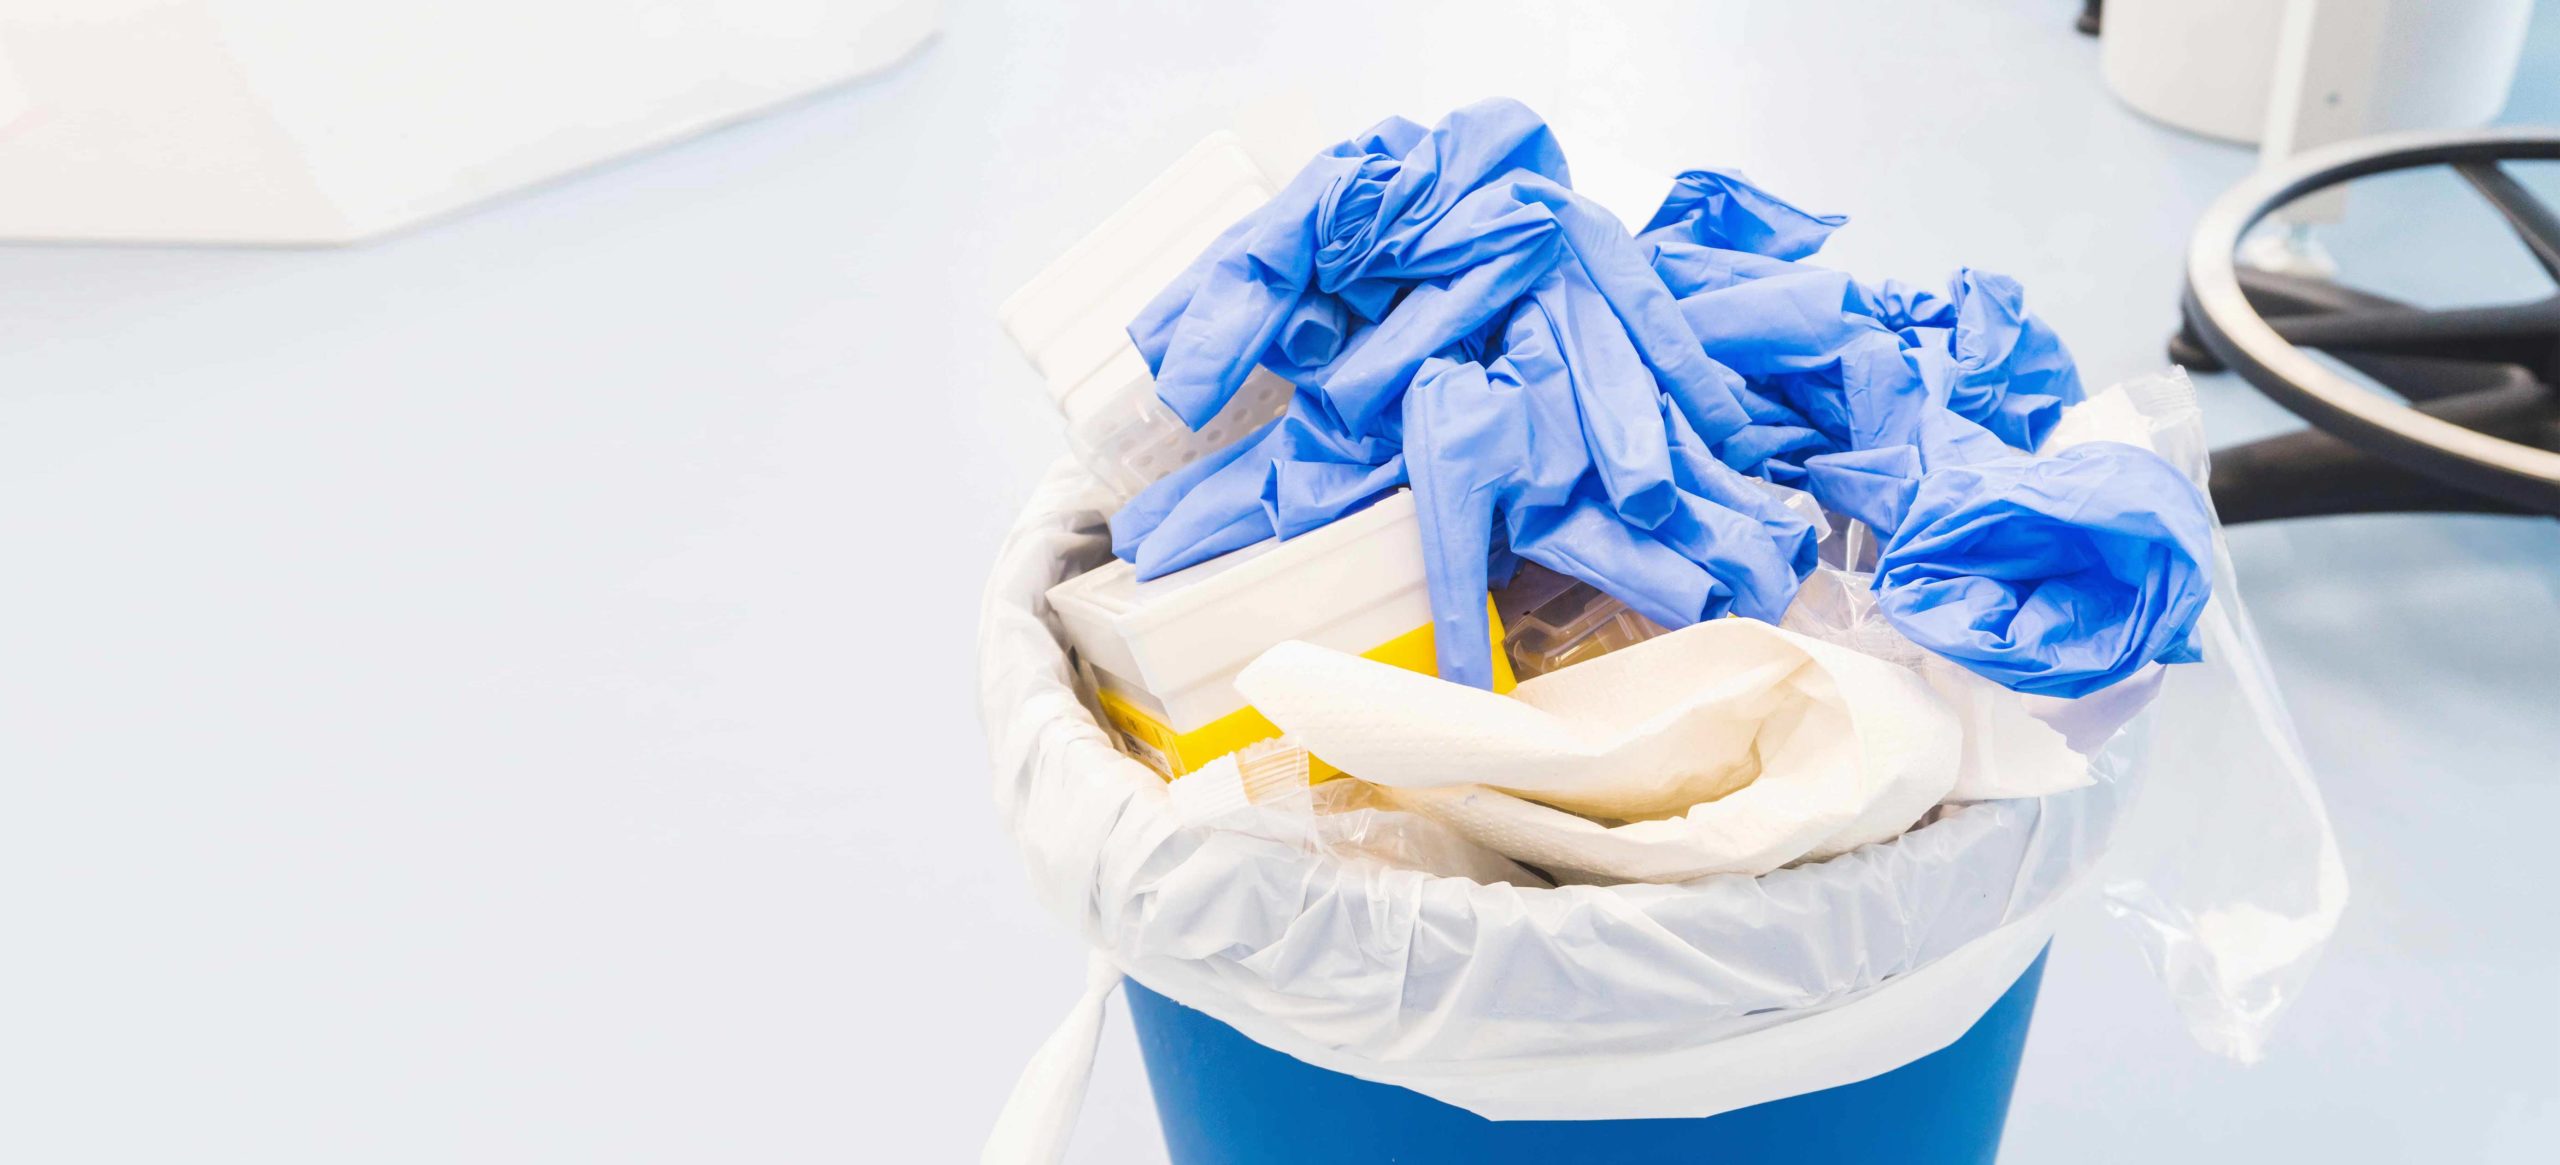 The forgotten biohazards: 10 commonly overlooked items that need special disposal